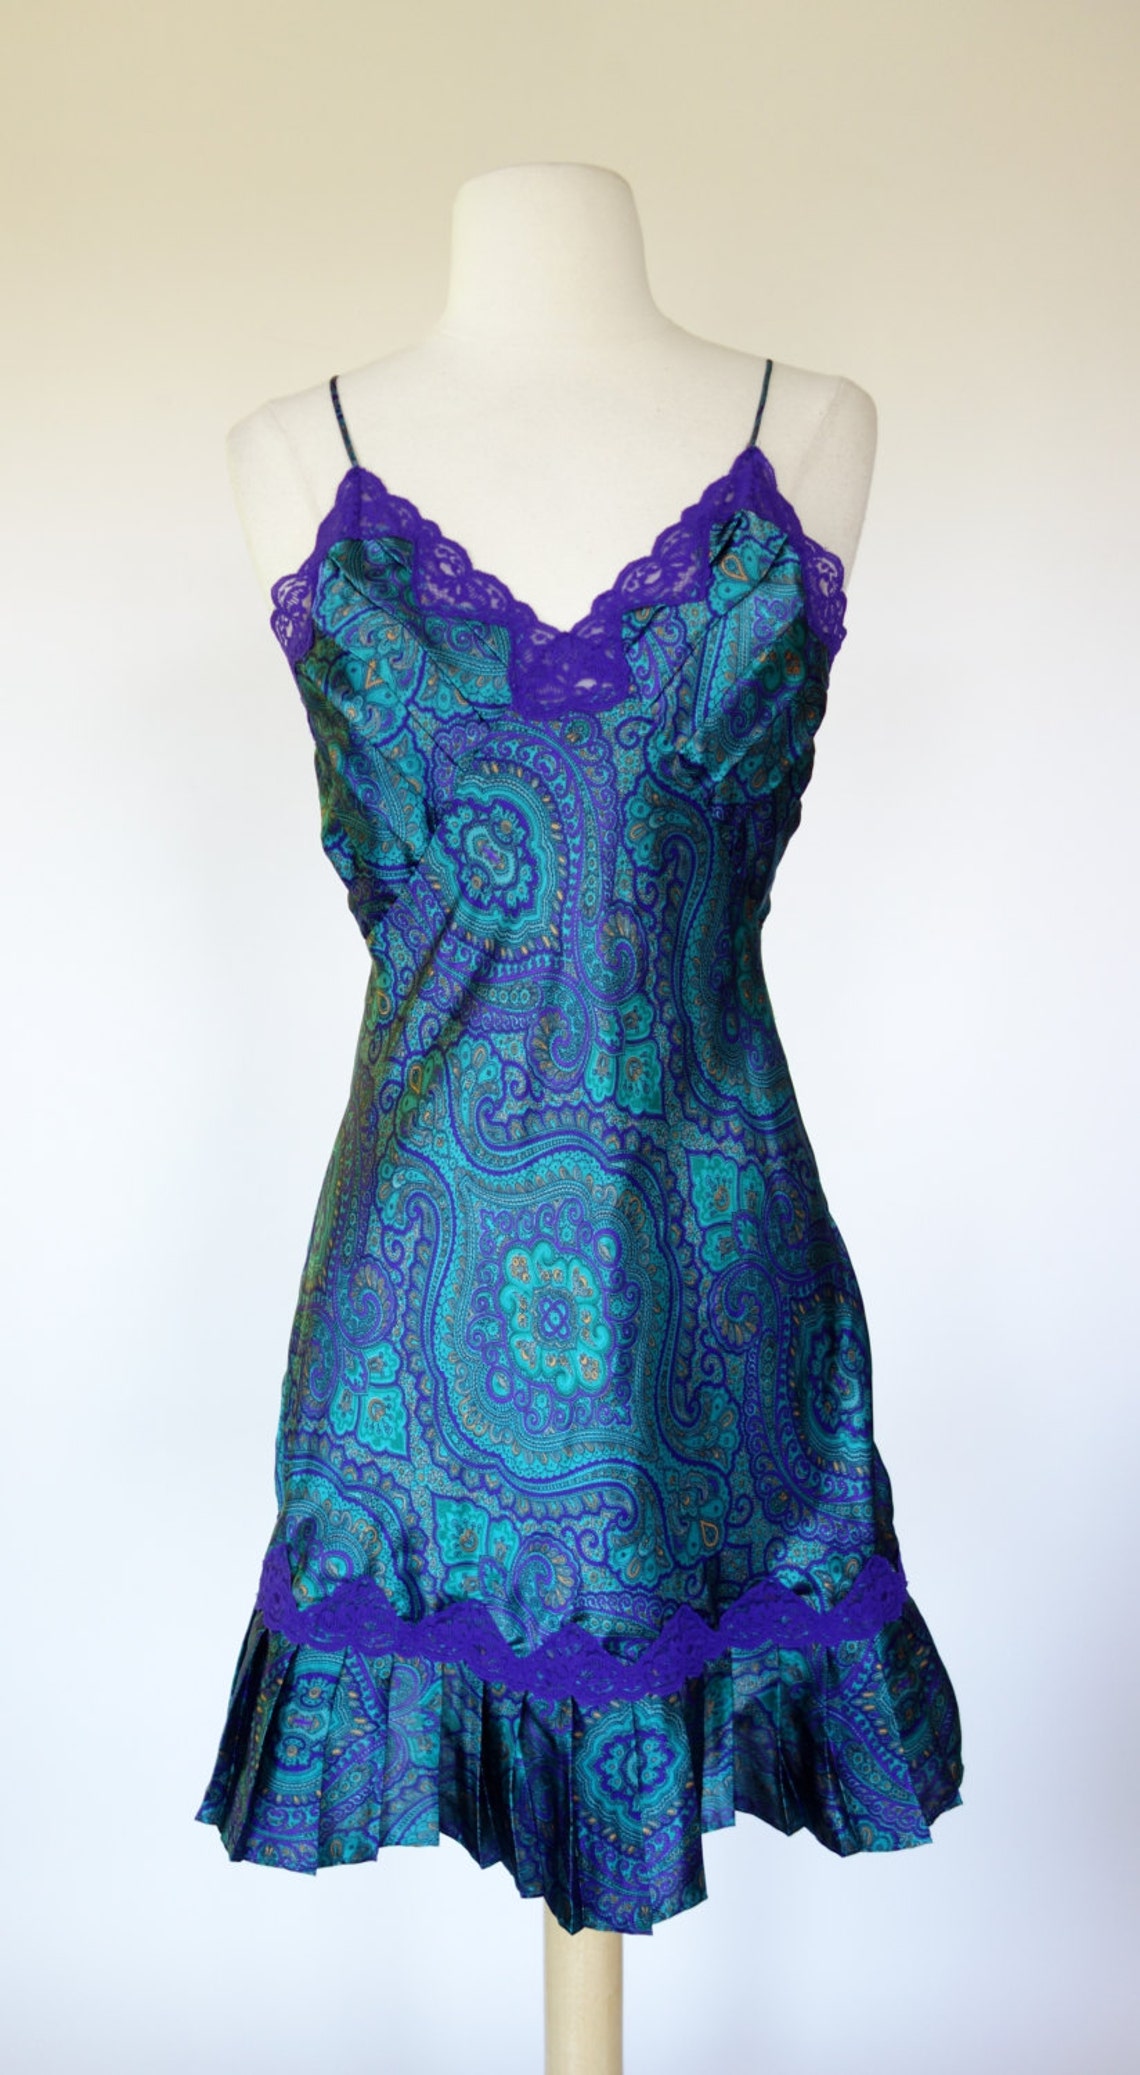 Victoria's Secret Negligee Purple and Teal Paisley Baby | Etsy